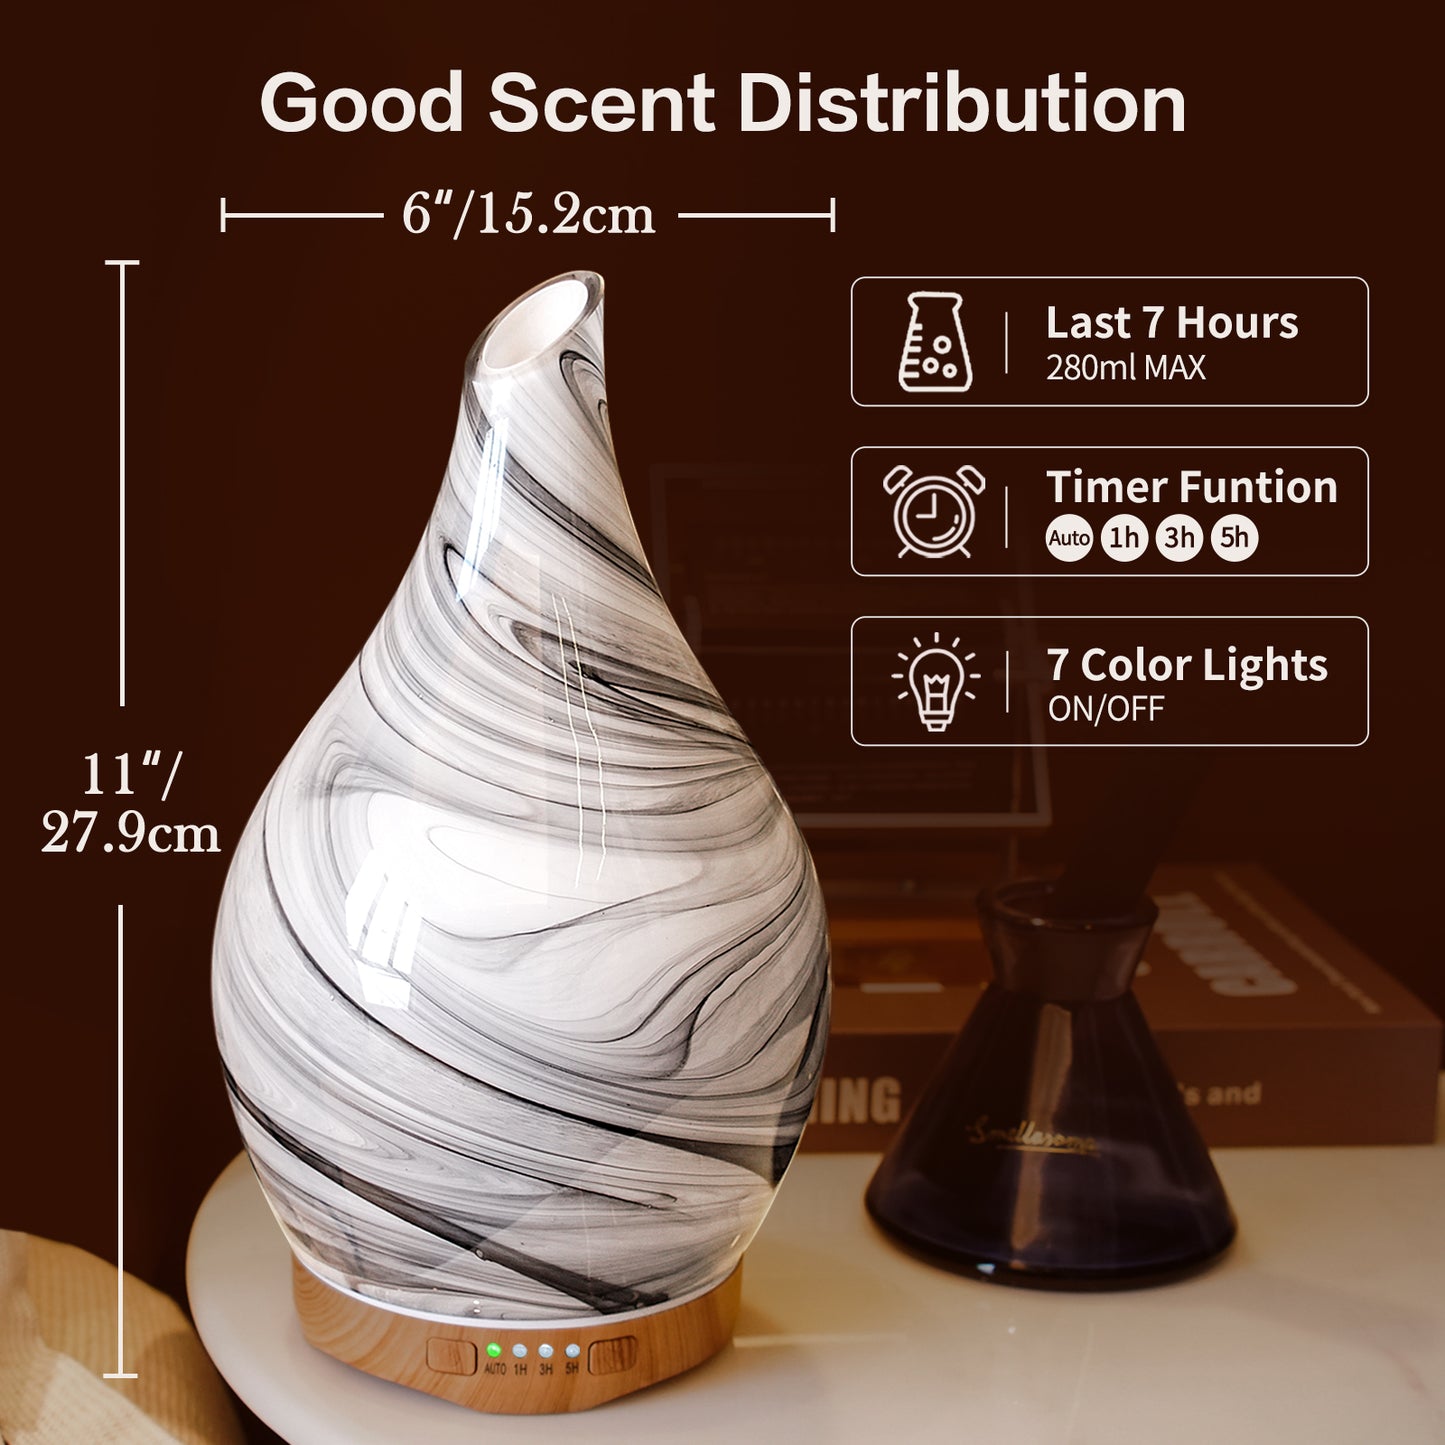 Porseme 280ml Essential Oil Diffuser Glass Color Changing Aroma Air Diffusers Aromatherapy Ultrasonic Cool Mist Humidifier 7 Running Hours Waterless Auto-Off for Sleeping, Yoga, Office, Spa (Ink)